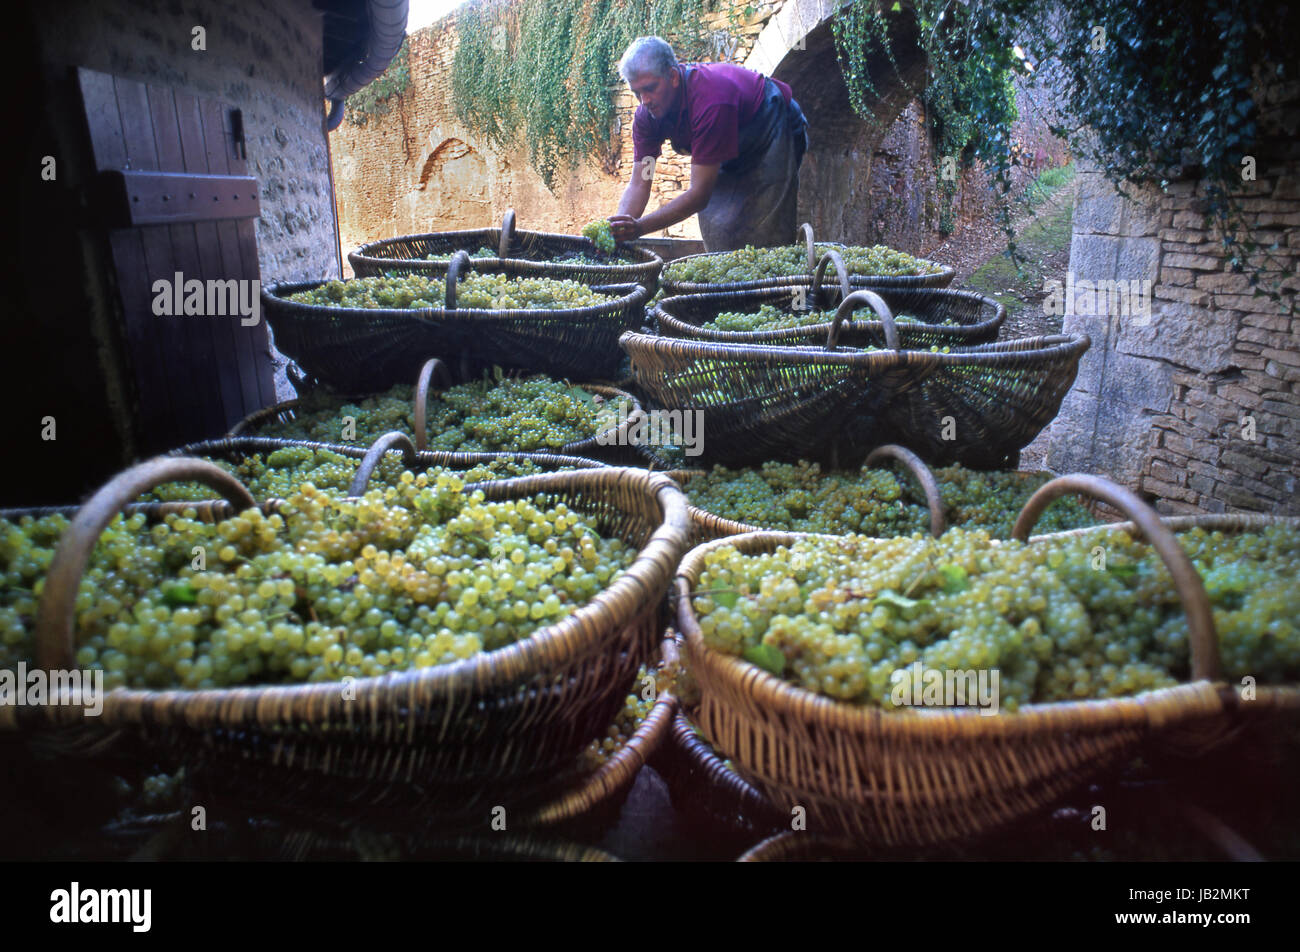 CHARDONNAY HARVEST Burgundy baskets of harvested Chardonnay grapes outside Louis Latour Château de Grancey winery, French wine worker checking grapes Stock Photo